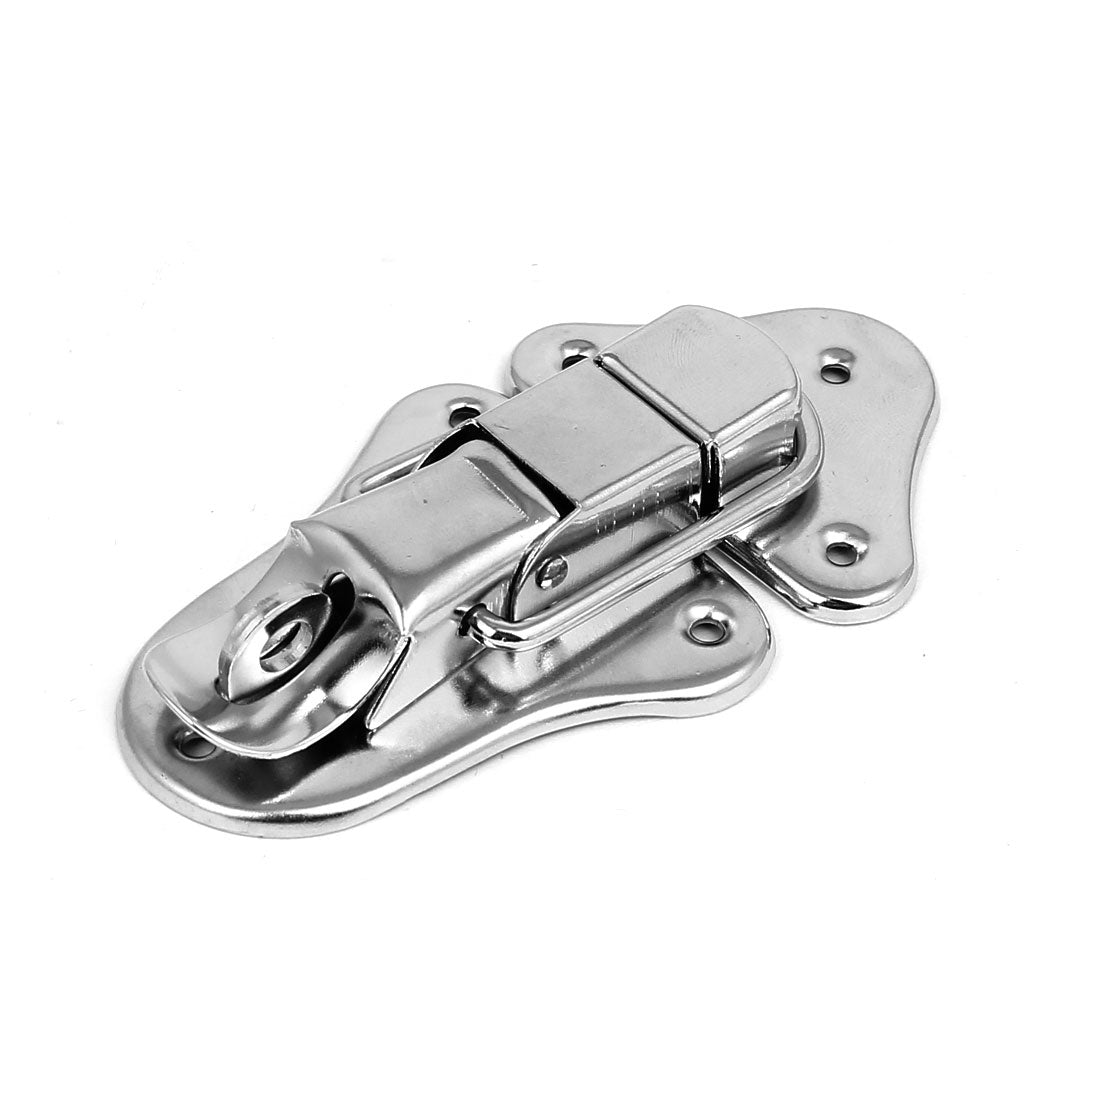 uxcell Uxcell Suitcase Briefcase Handbag Metal Toggle Latch Hasp Lock Silver Tone 90mm Long